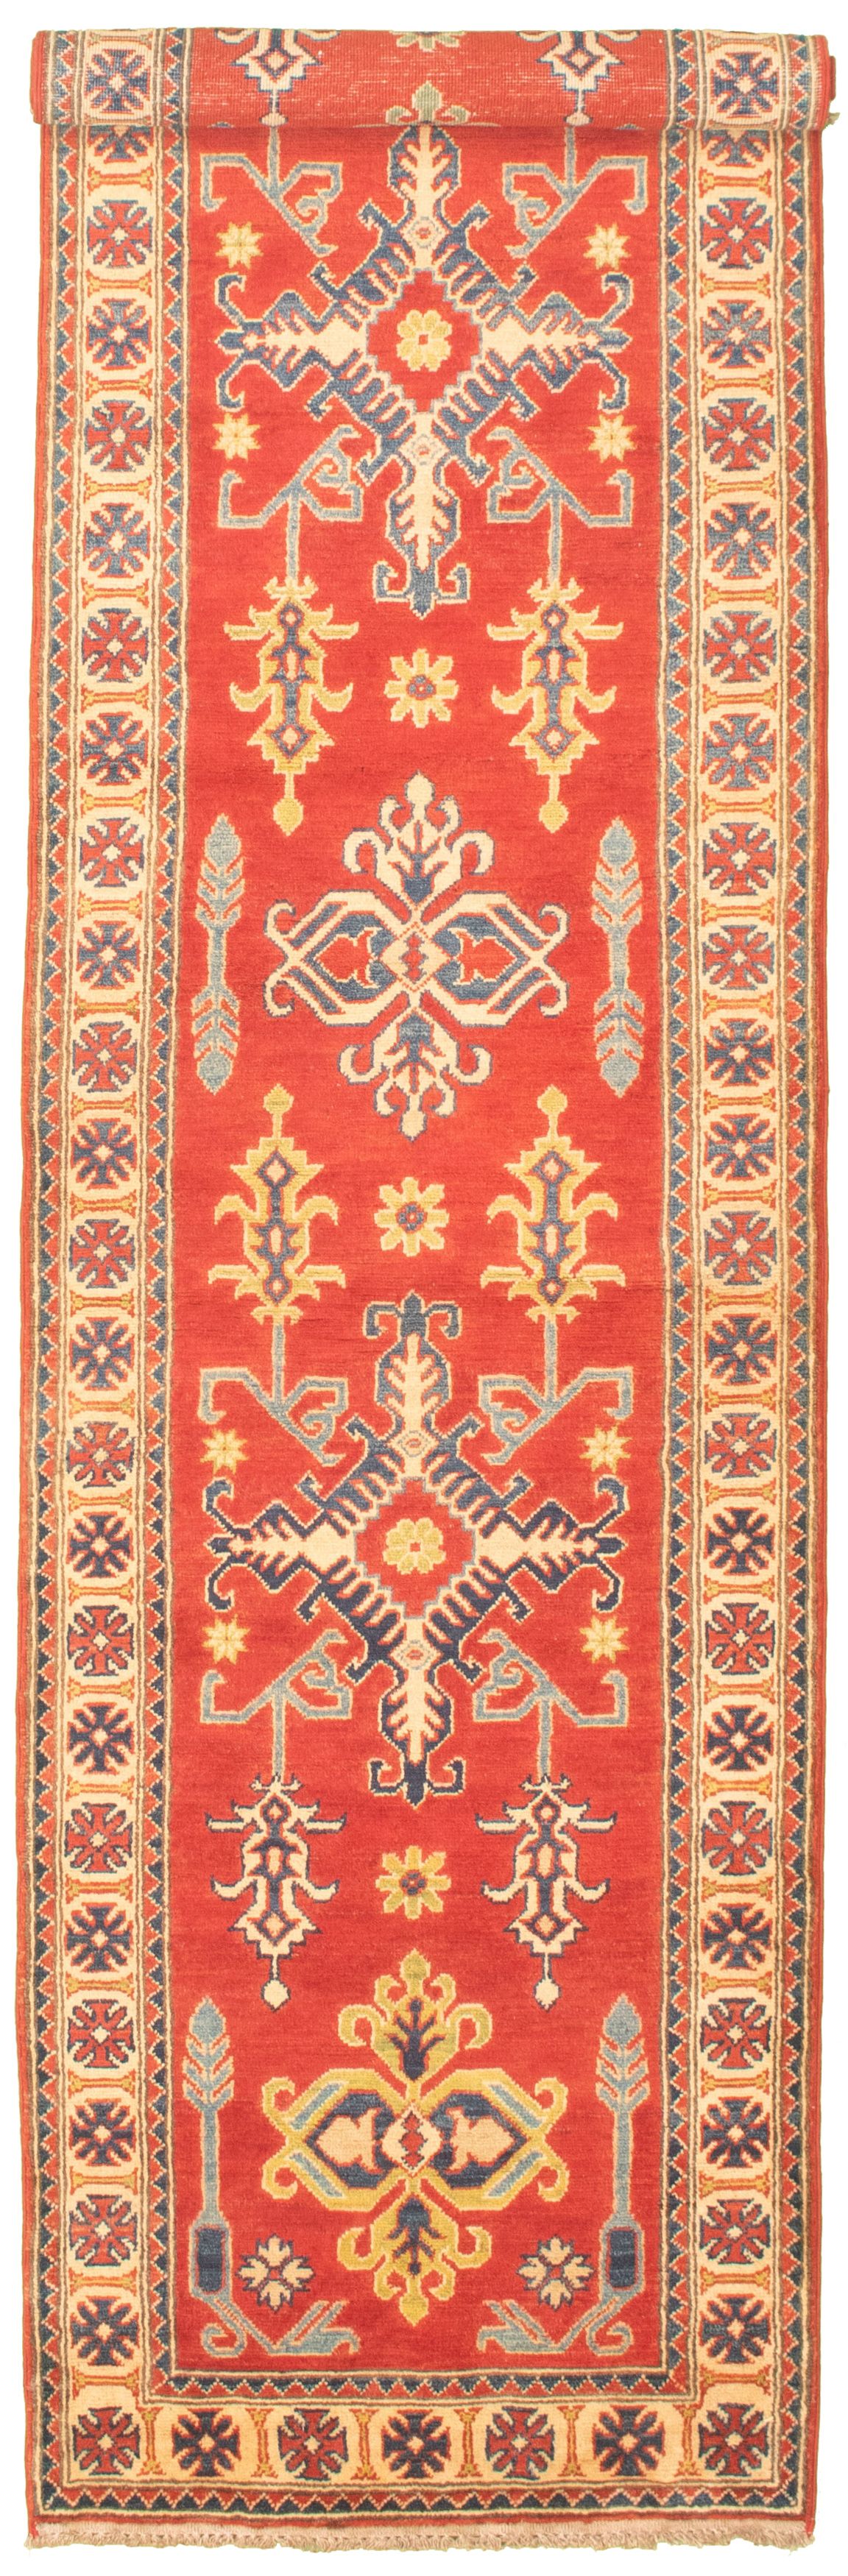 Hand-knotted Finest Gazni Red Wool Rug 2'8" x 11'3" Size: 2'8" x 11'3"  